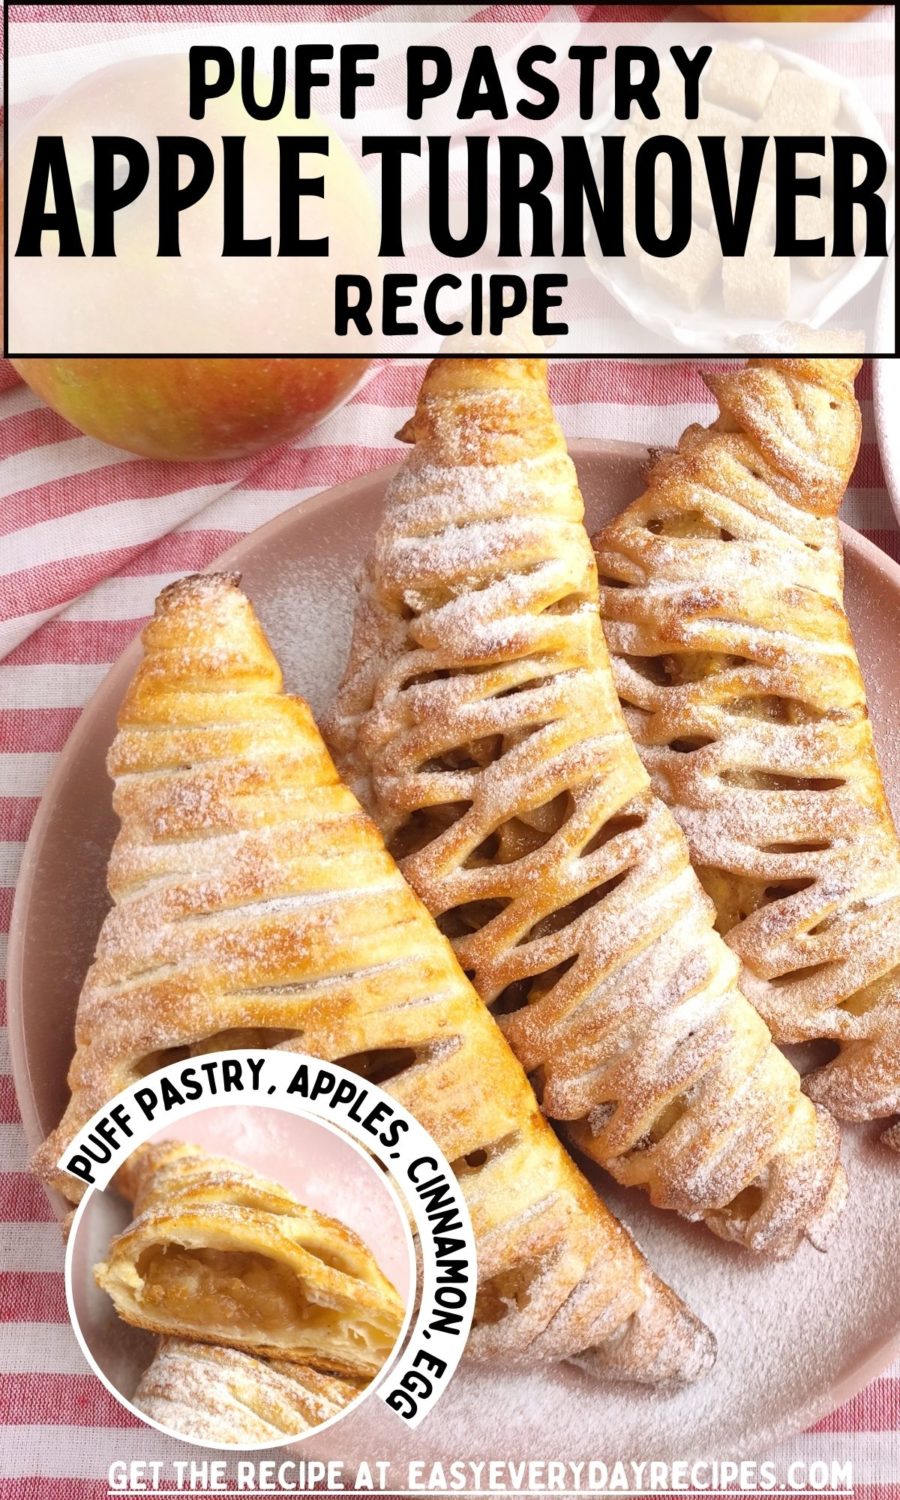 Puff pastry apple turnover recipe.